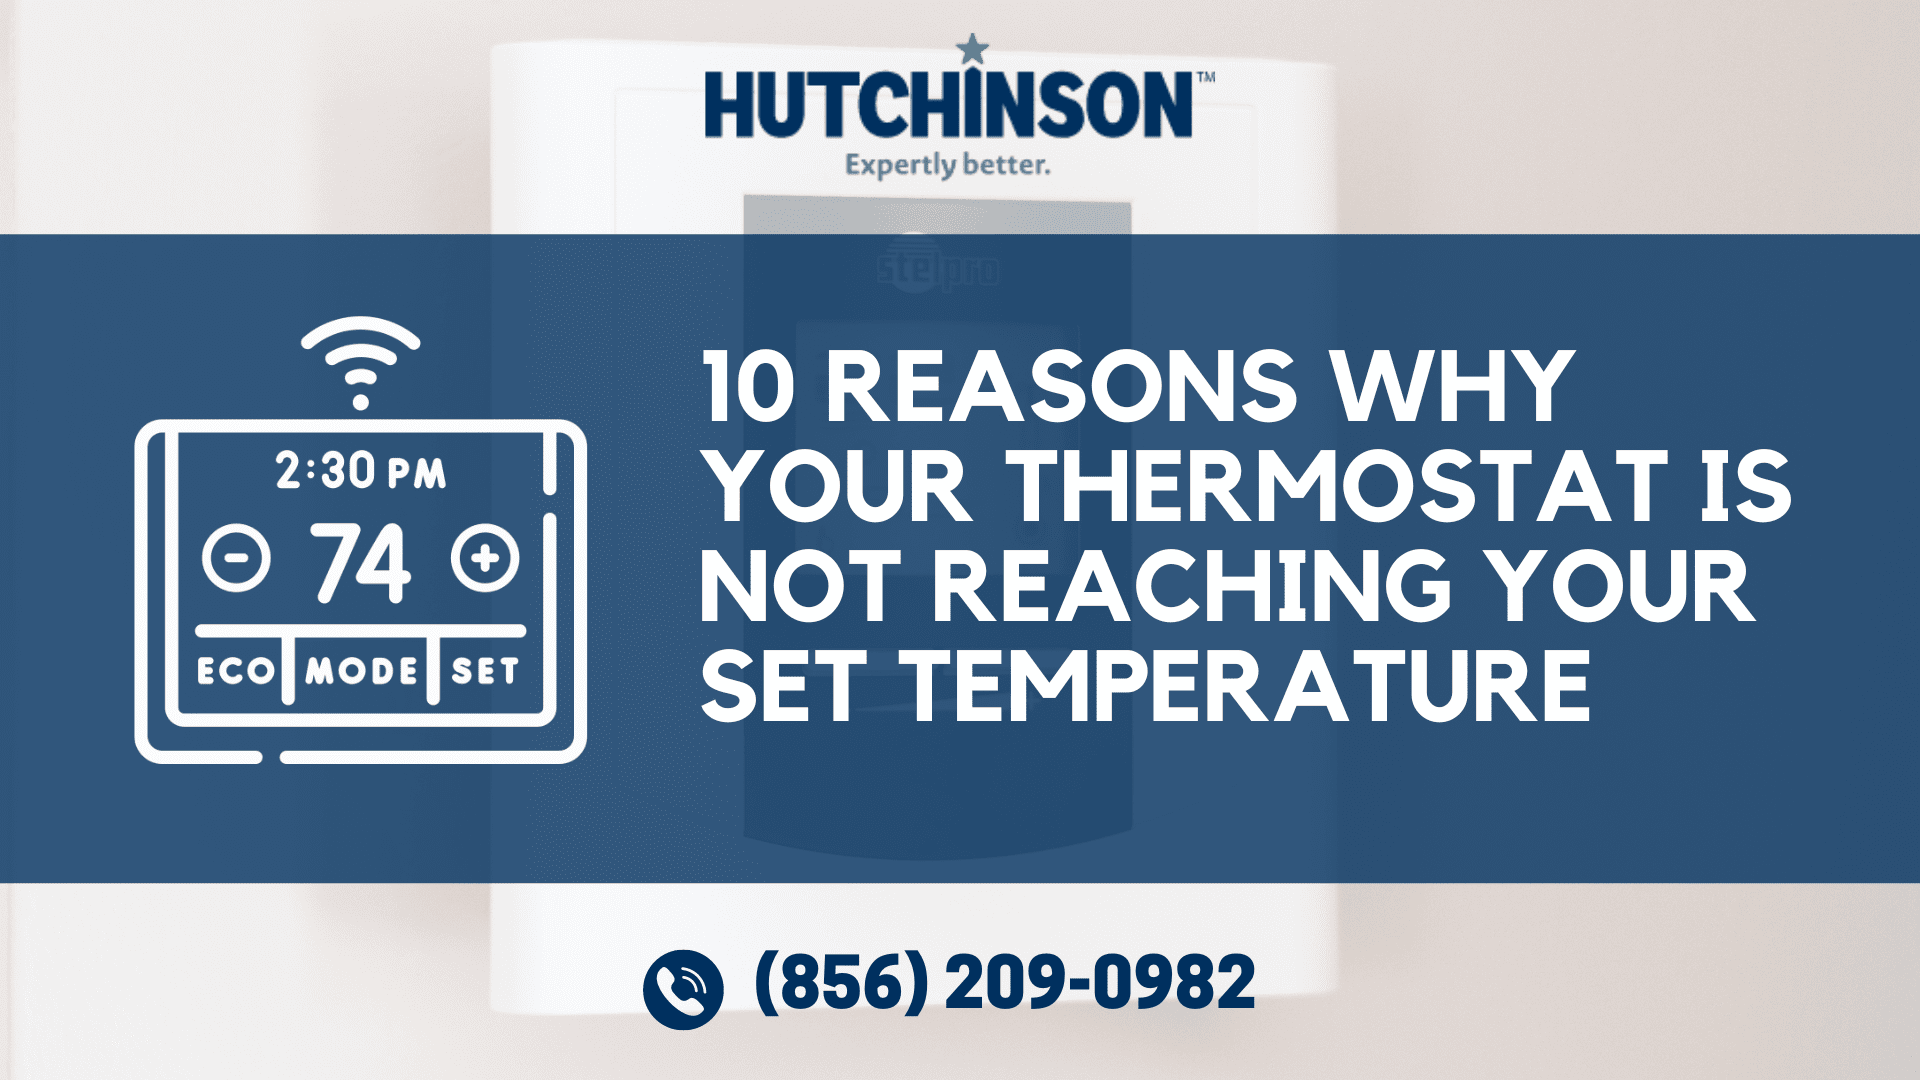 Why Is My Room Temperature Higher Than My Thermostat Setting?